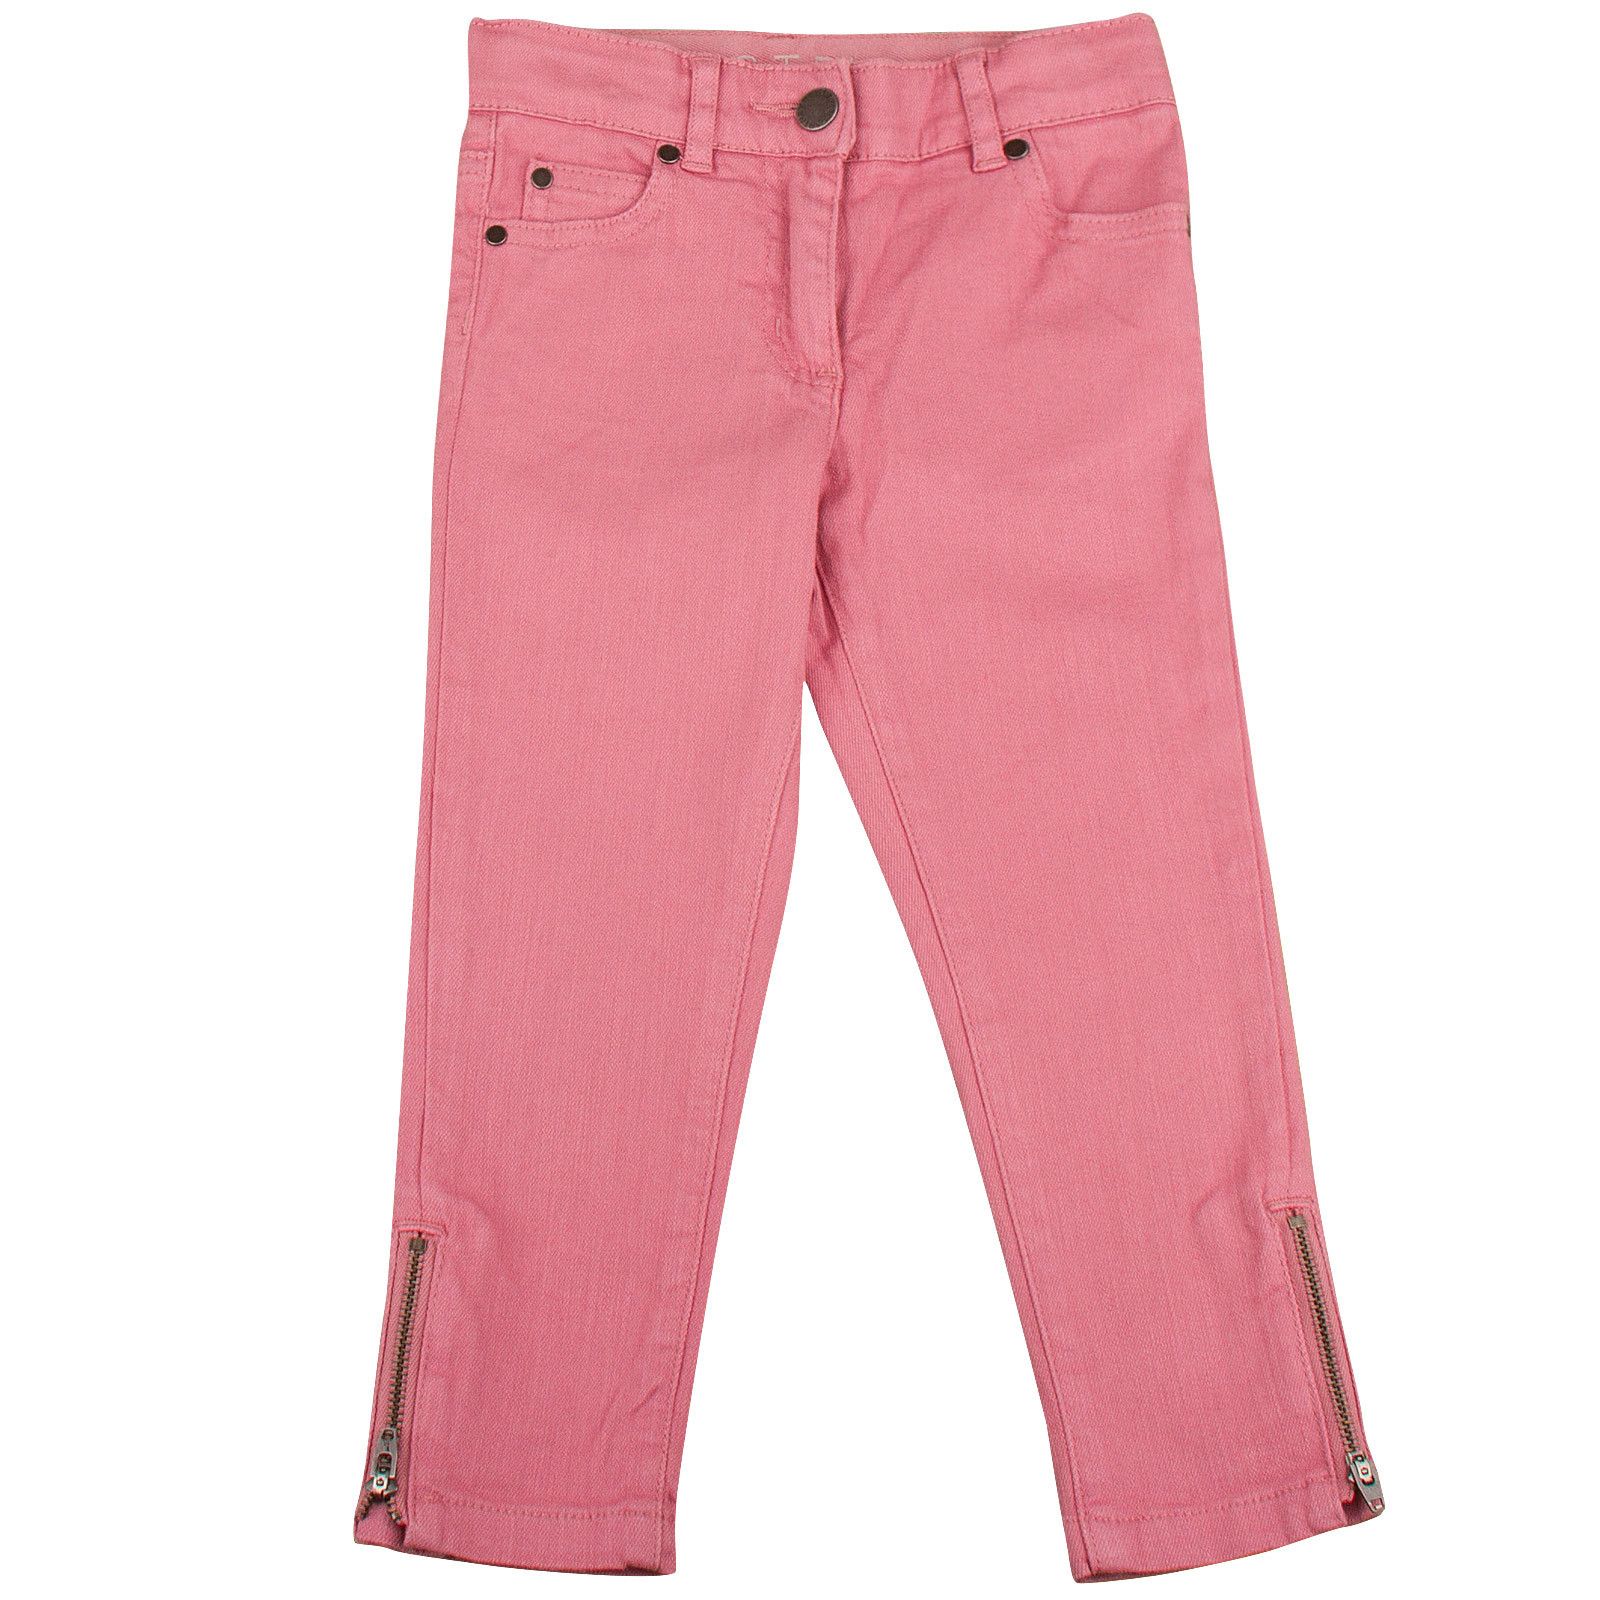 Nina Girls Red Cotton Trousers With Zips At The Ankle - CÉMAROSE | Children's Fashion Store - 1